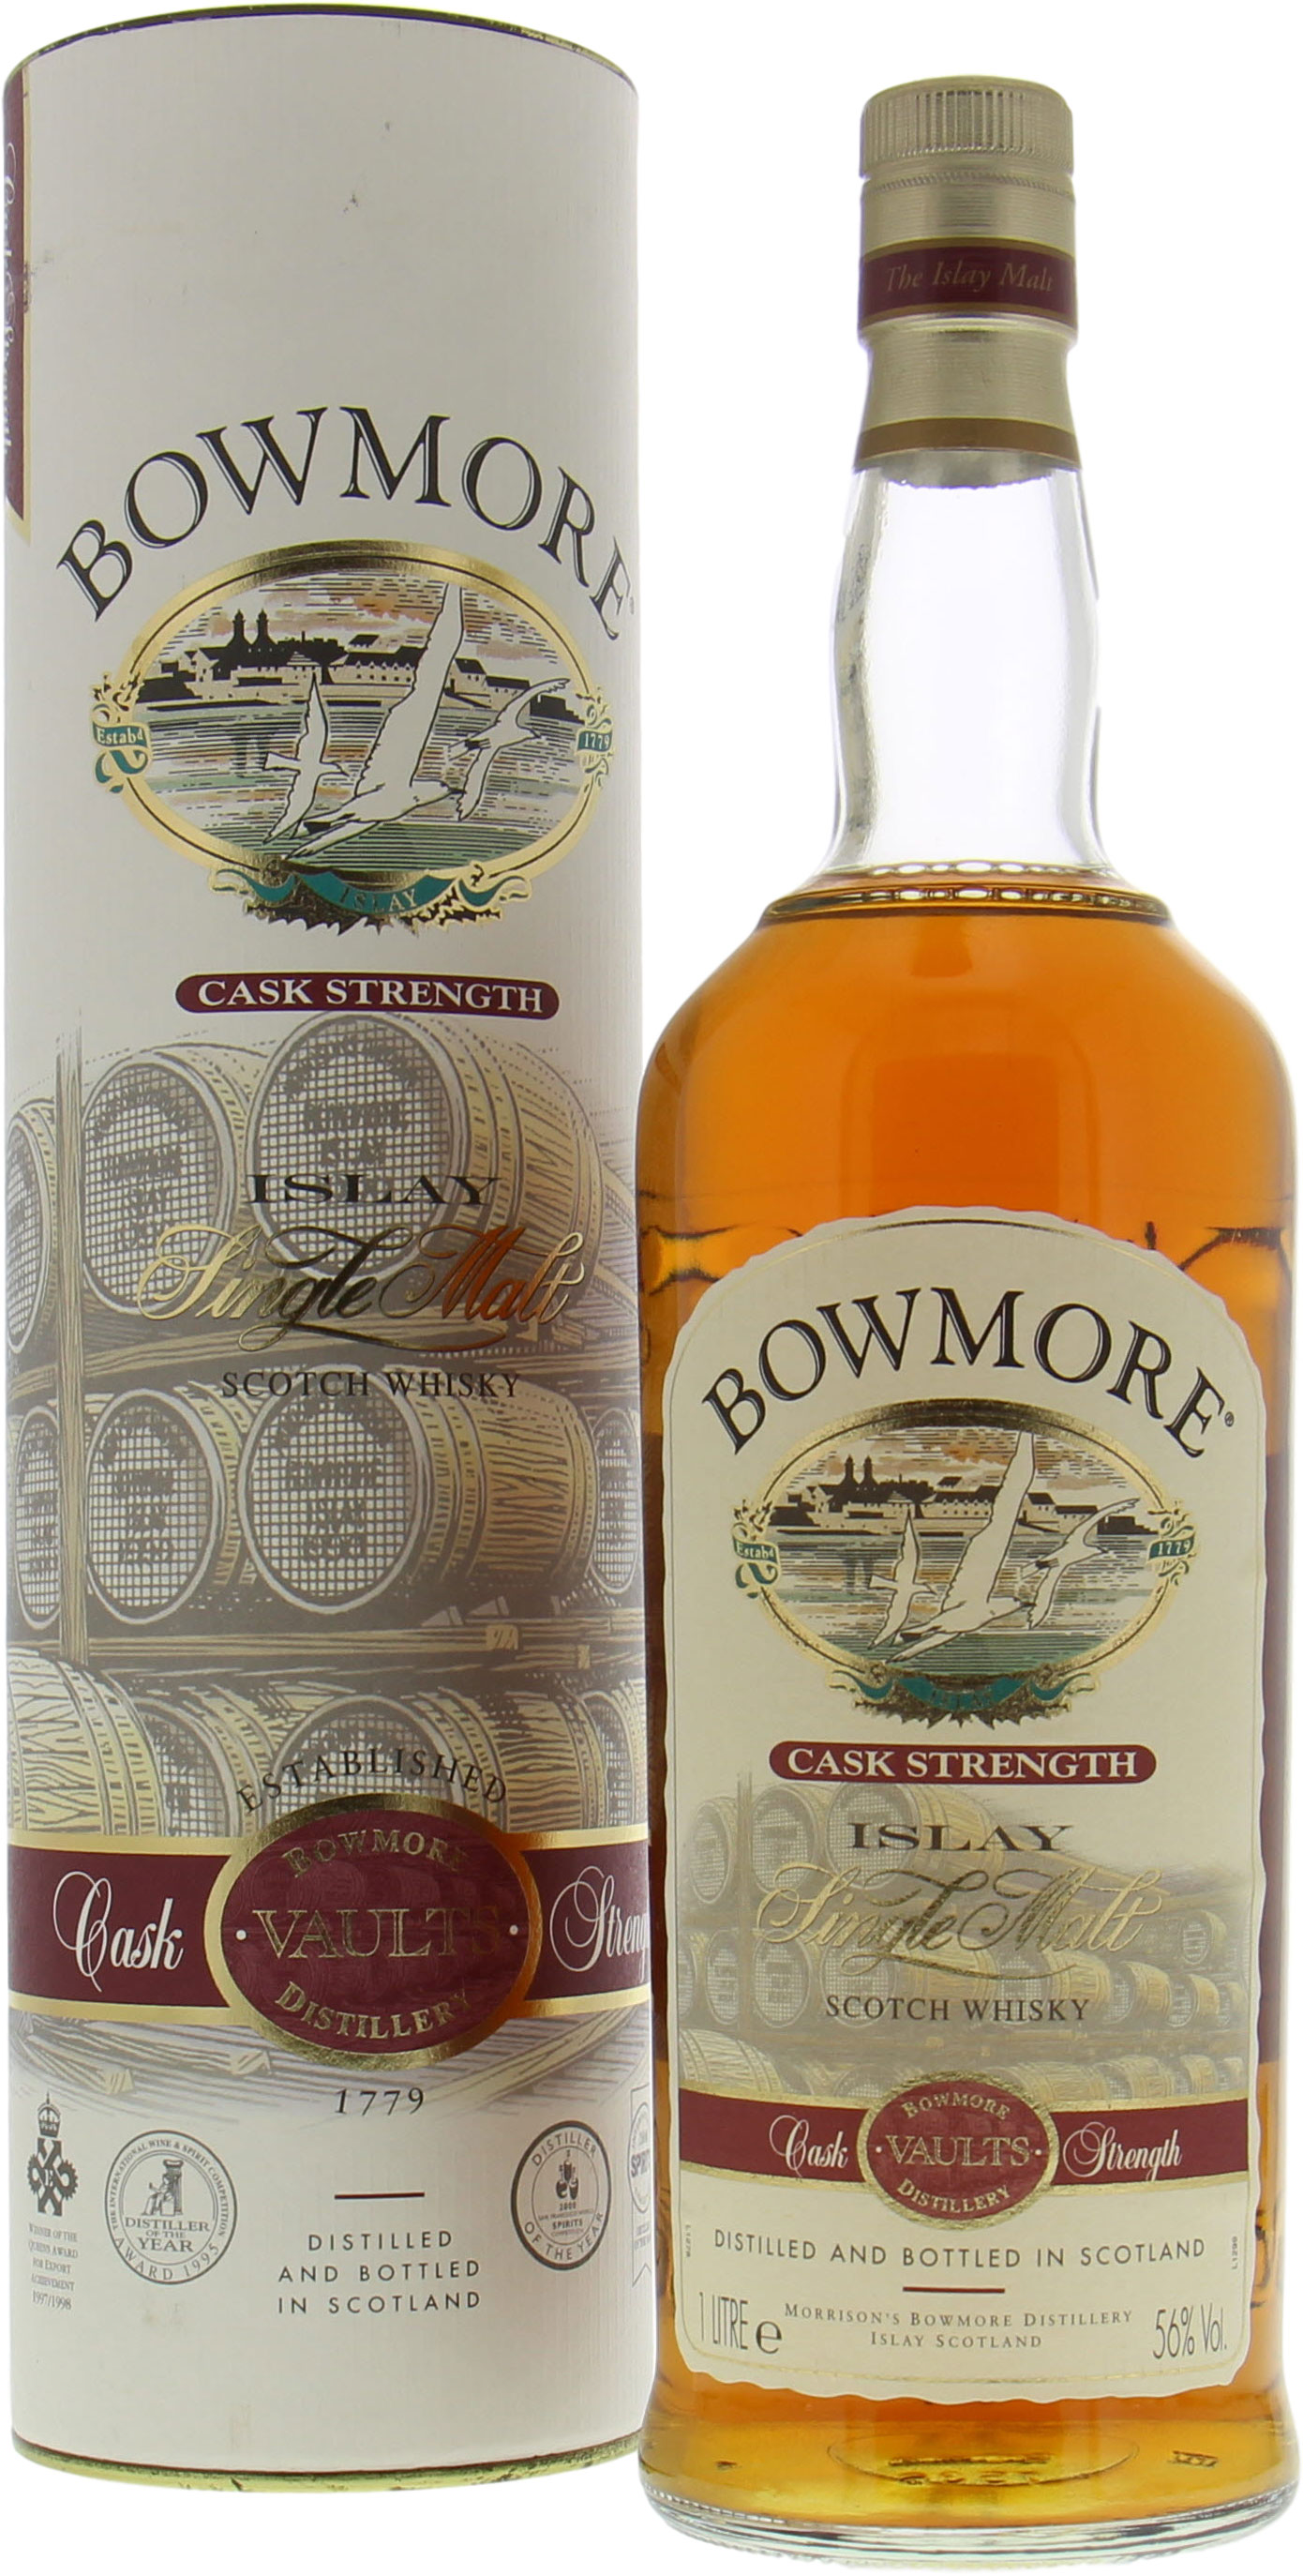 Bowmore - Cask Strength Old Vitage Label 56% NV In Original Container